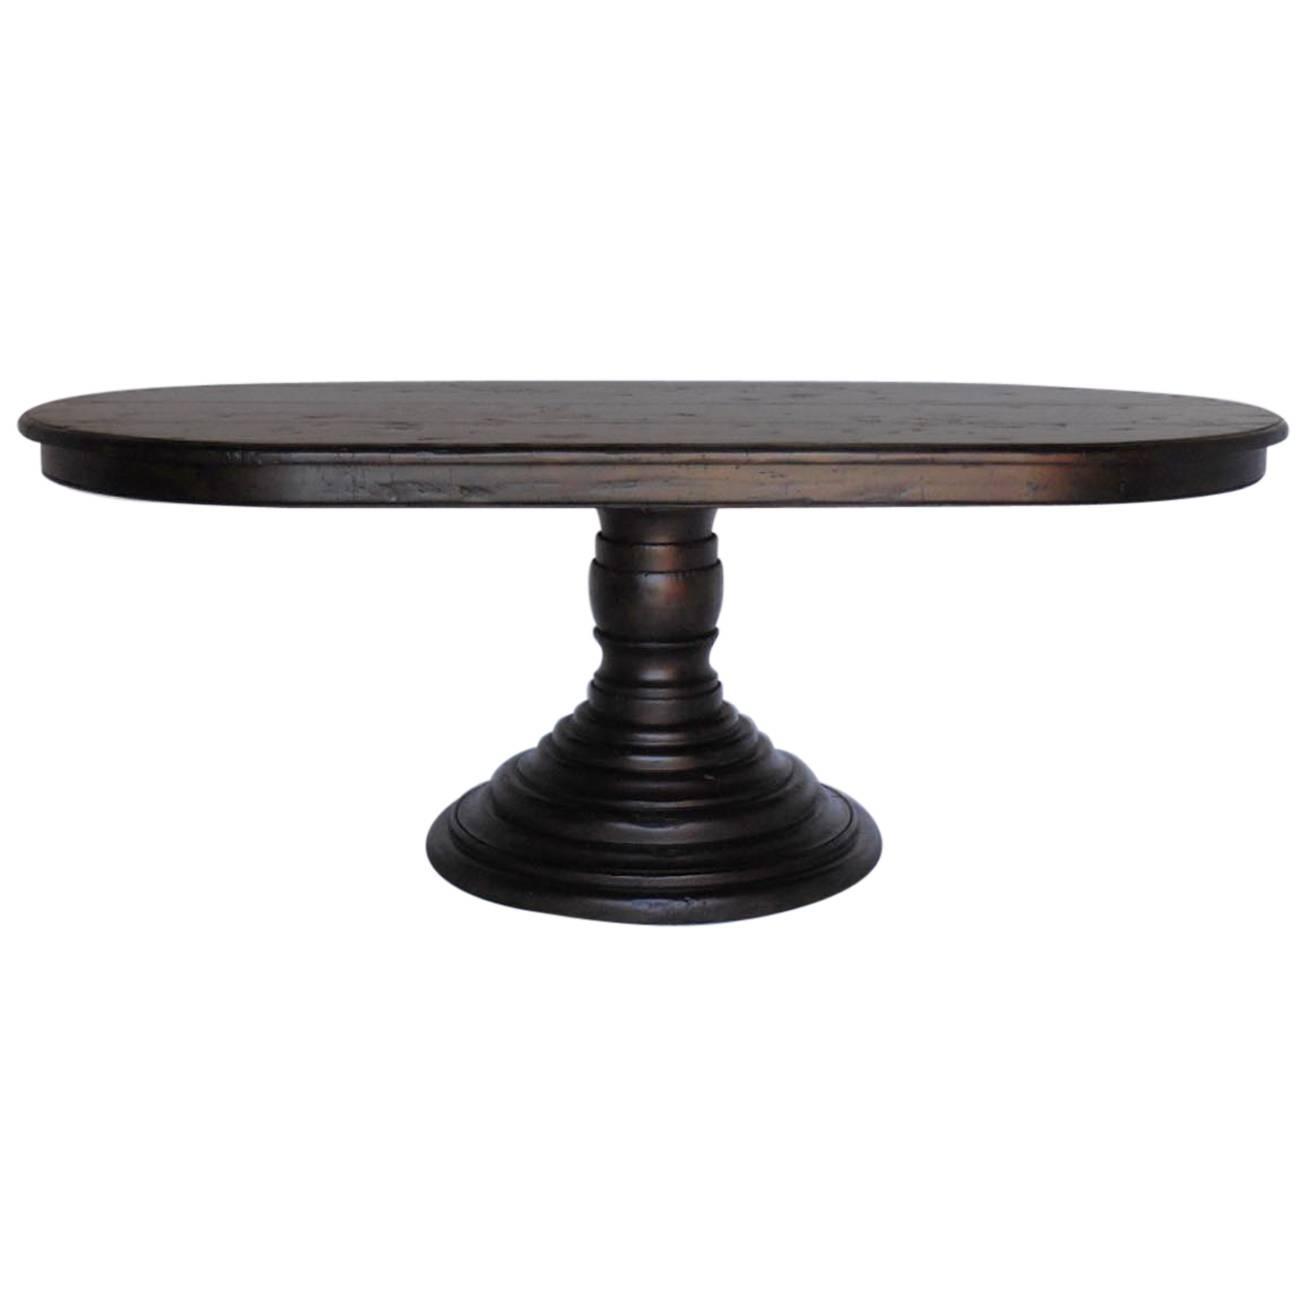 Custom Walnut beehive pedestal table with oval top